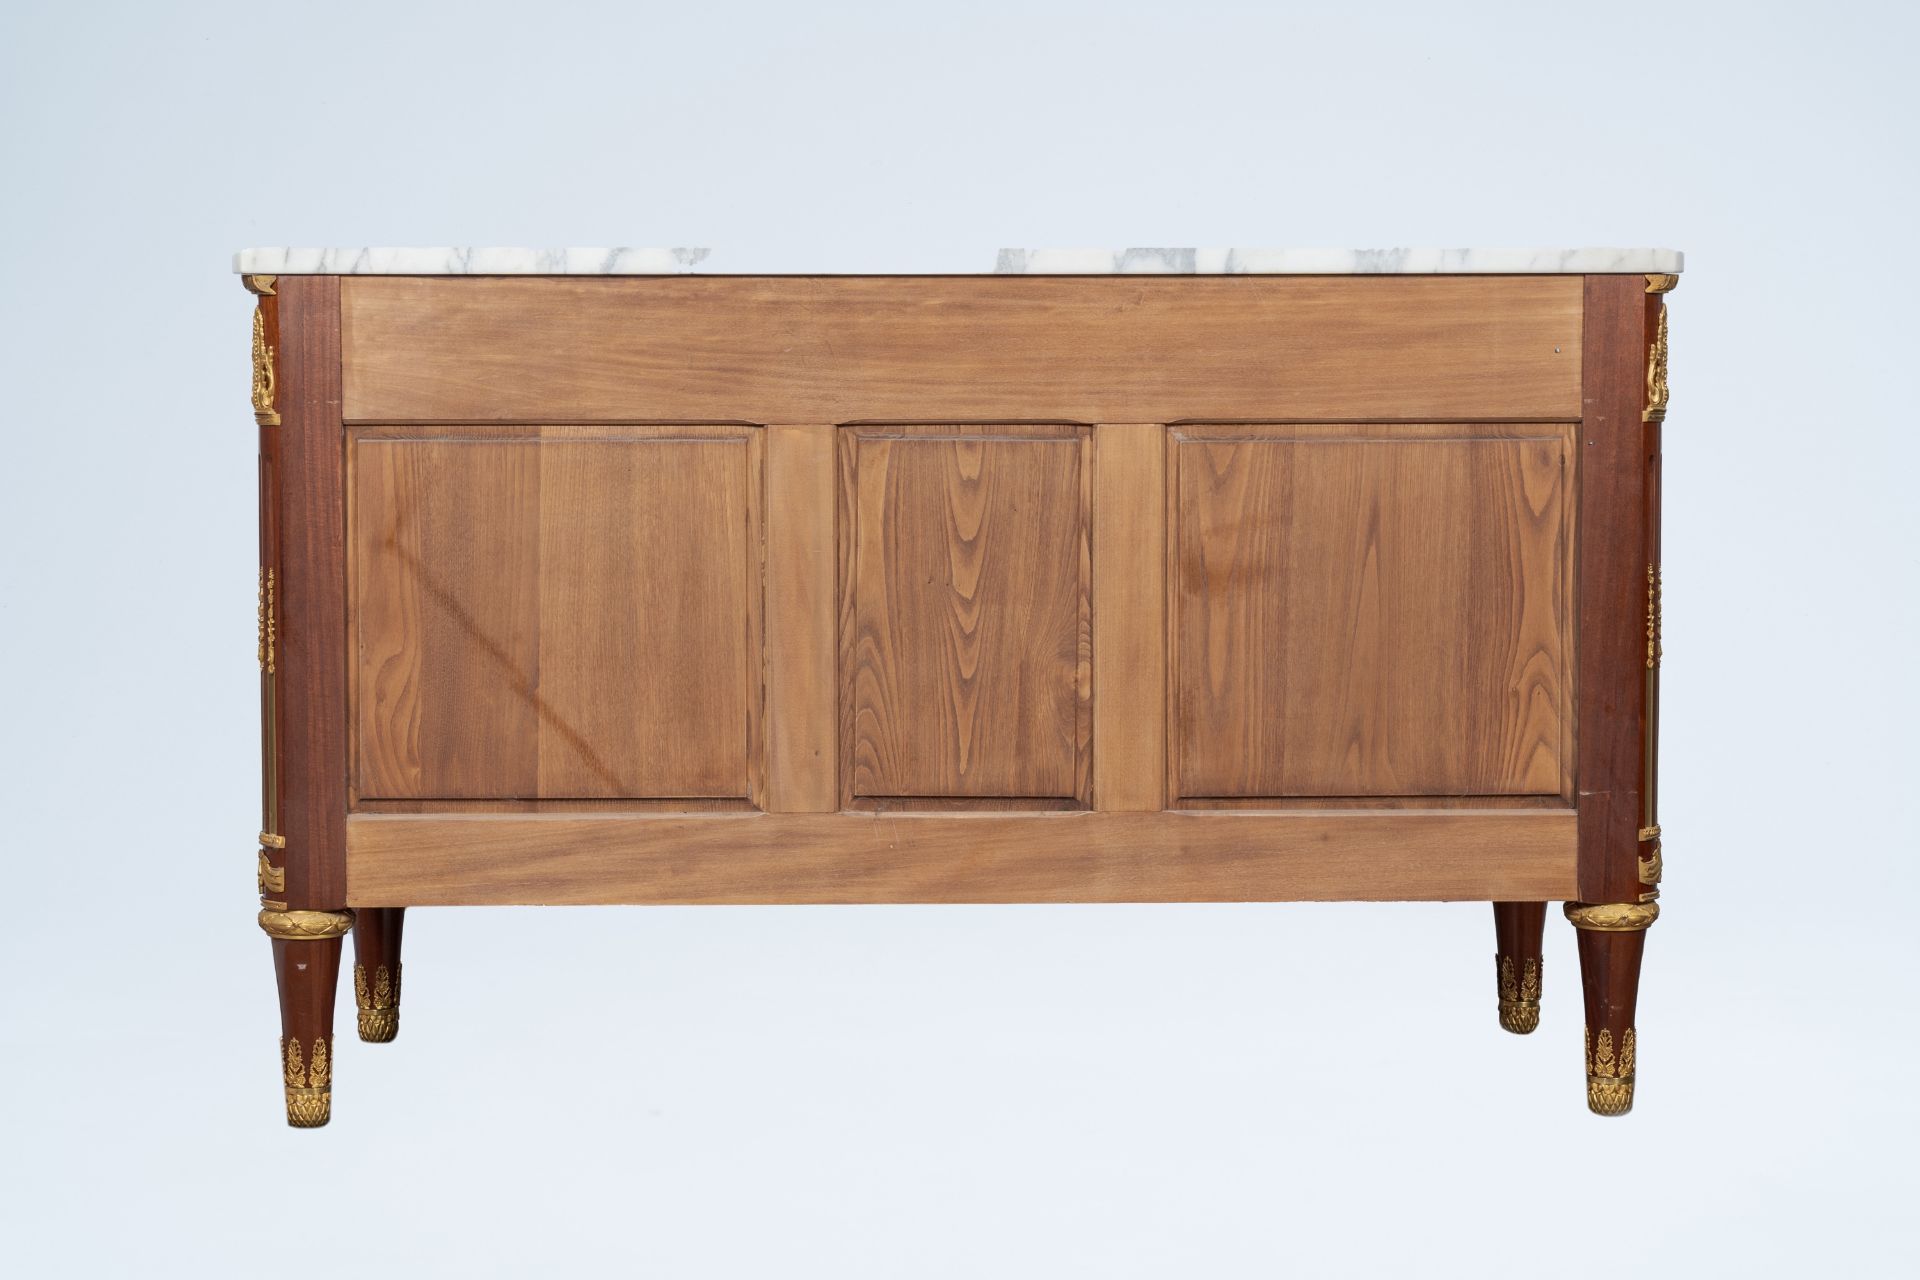 An impressive Neoclassical gilt bronze mounted wood chest of drawers with marble top, 20th C. - Image 8 of 10